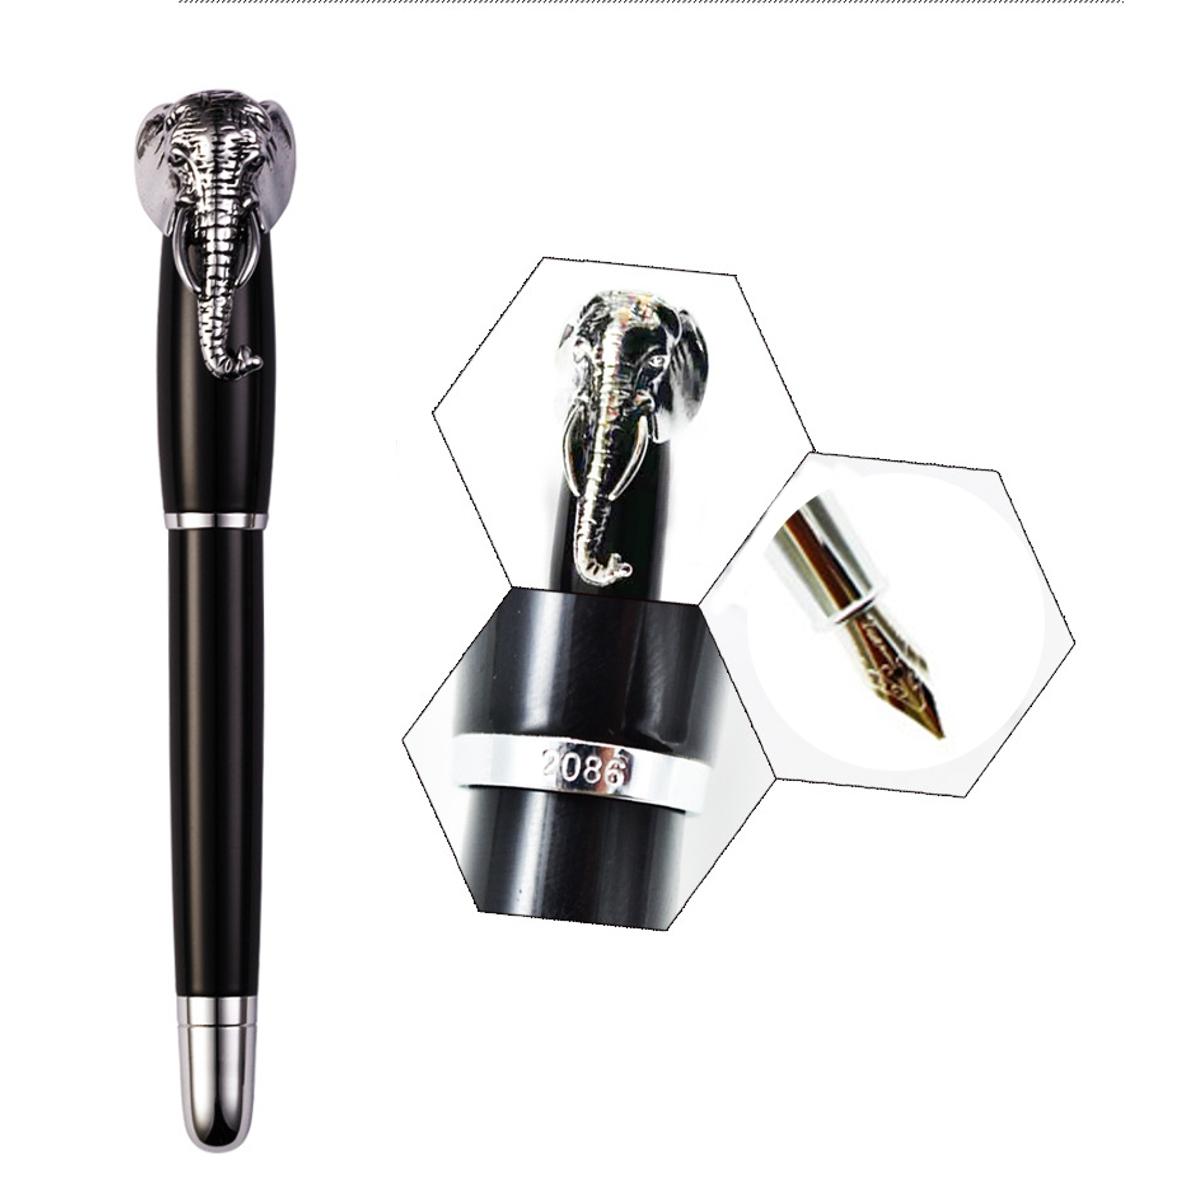 

Fuliwen 2086 Metal Elephant Fountain Pen Heavy Writing Signing Pens M/Orb 1.0mm Nib Gifts for Friends Family